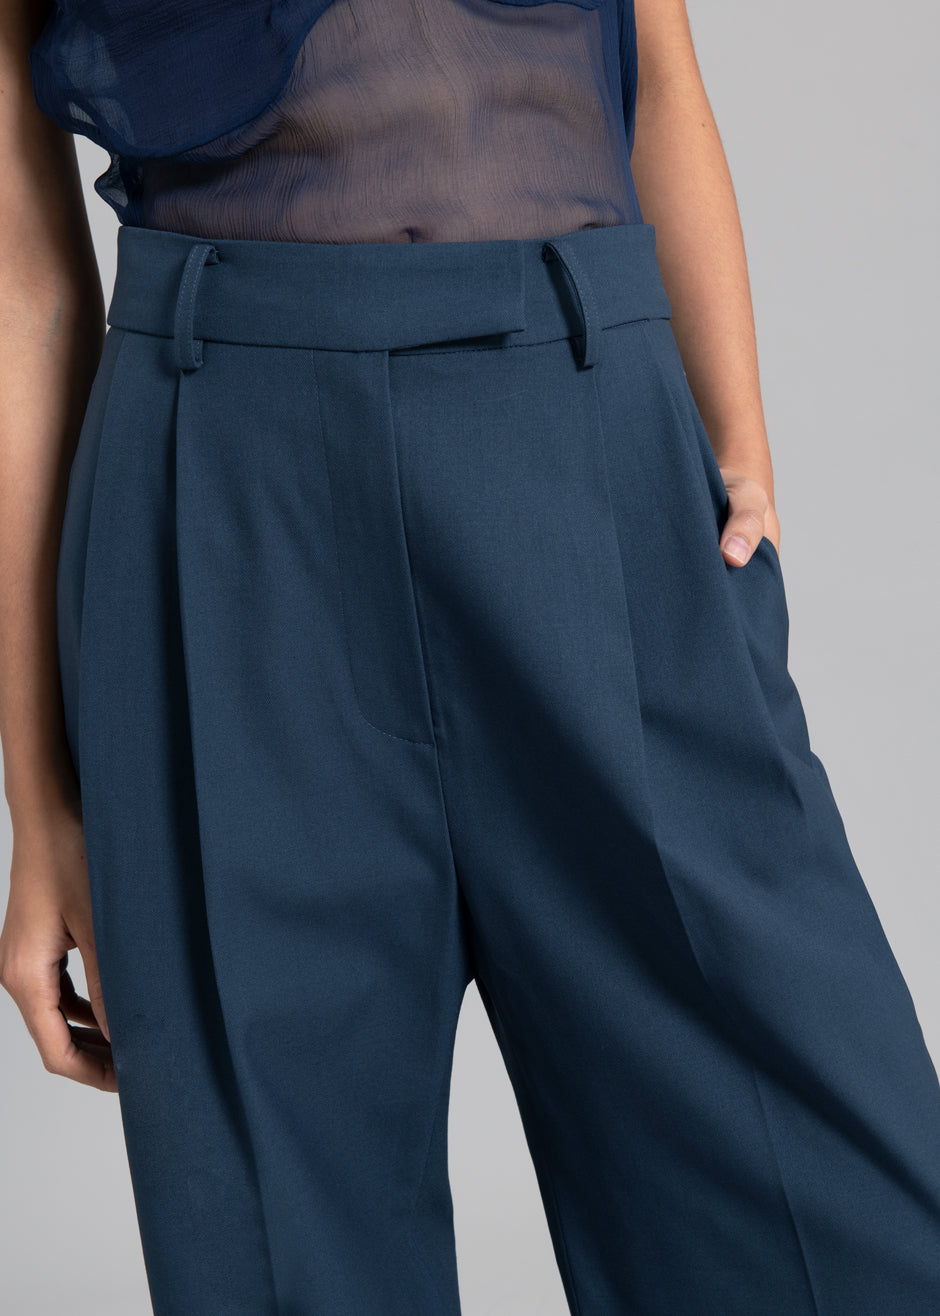 Wool Blend Suit Pants in blue - Palm Angels® Official